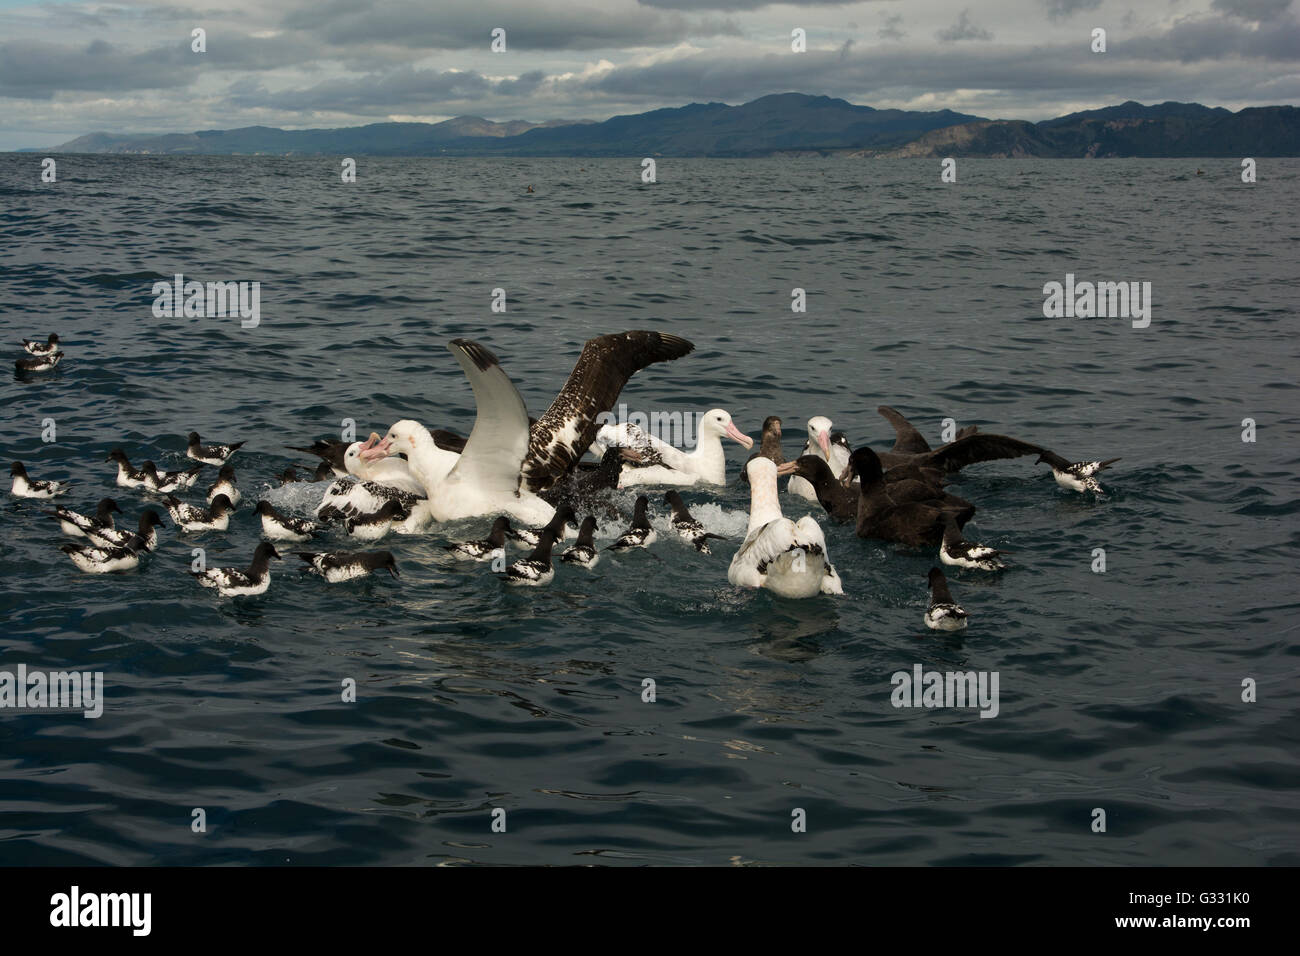 Albatross Encounter attract on the Pacific Ocean albatrosses and other seabirds with baits from fish liver. Stock Photo